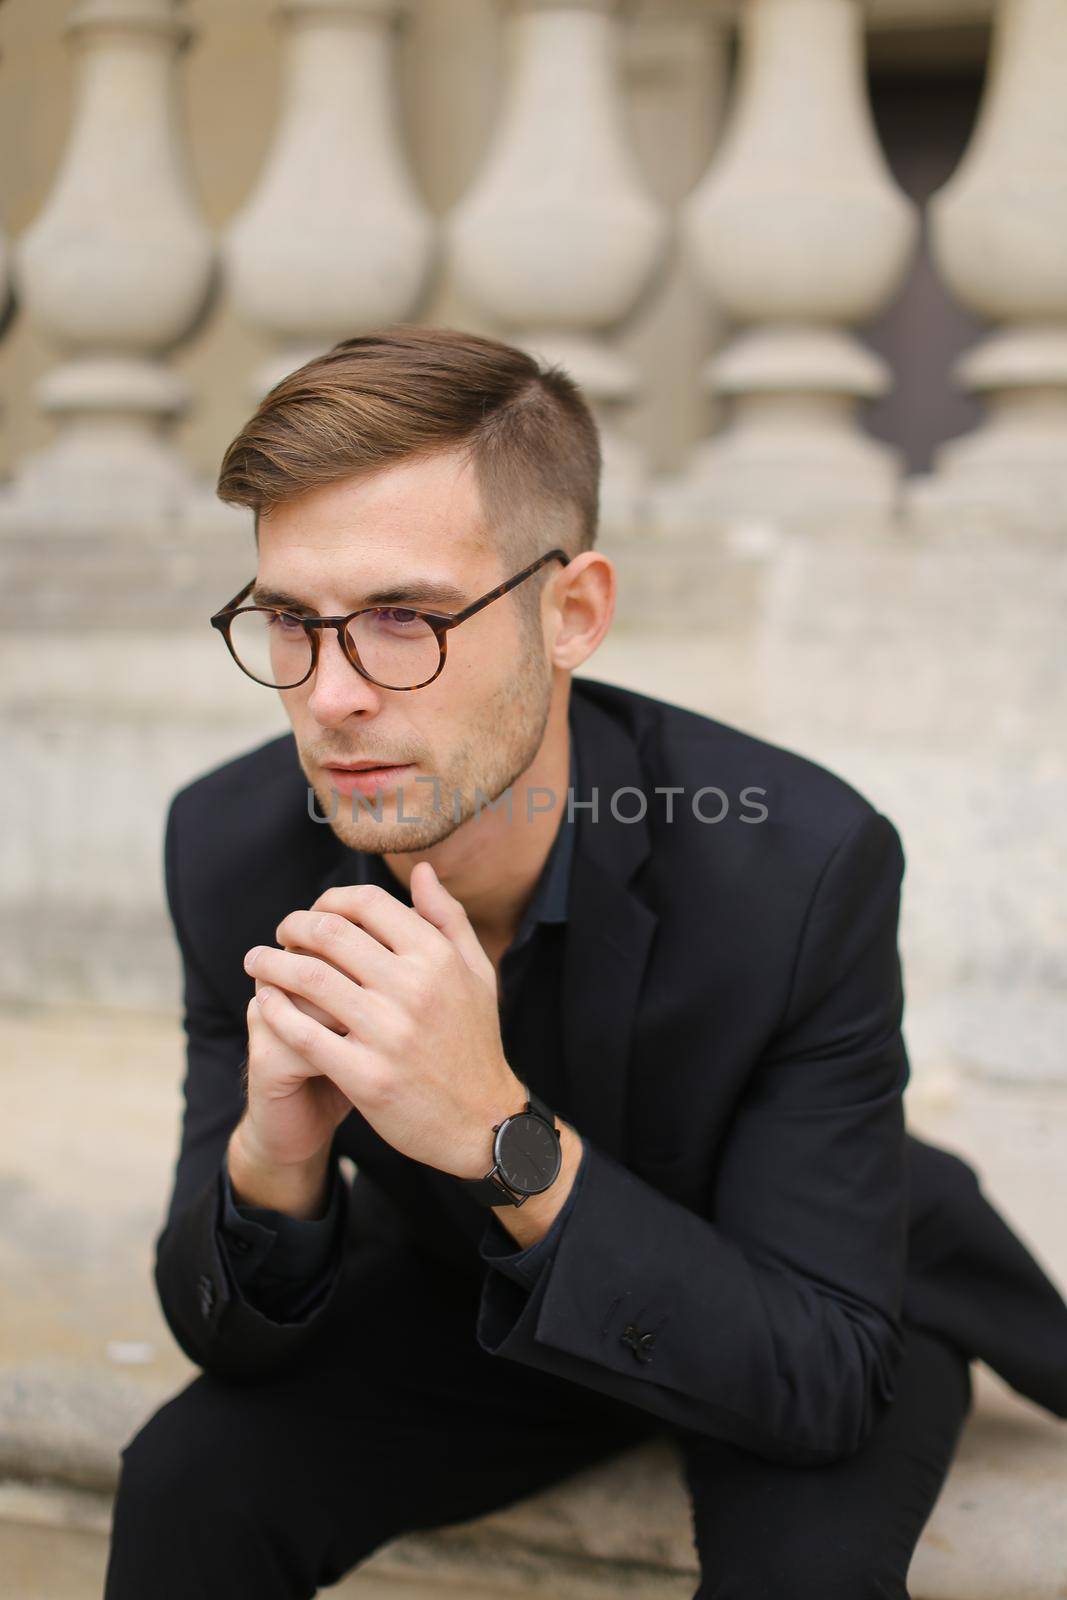 Young fashionable man sitting on sidewalk and leaning on concrete railing of building, wearing black suit and glasses. Concept of walkig in city, urban photo session and male person model.